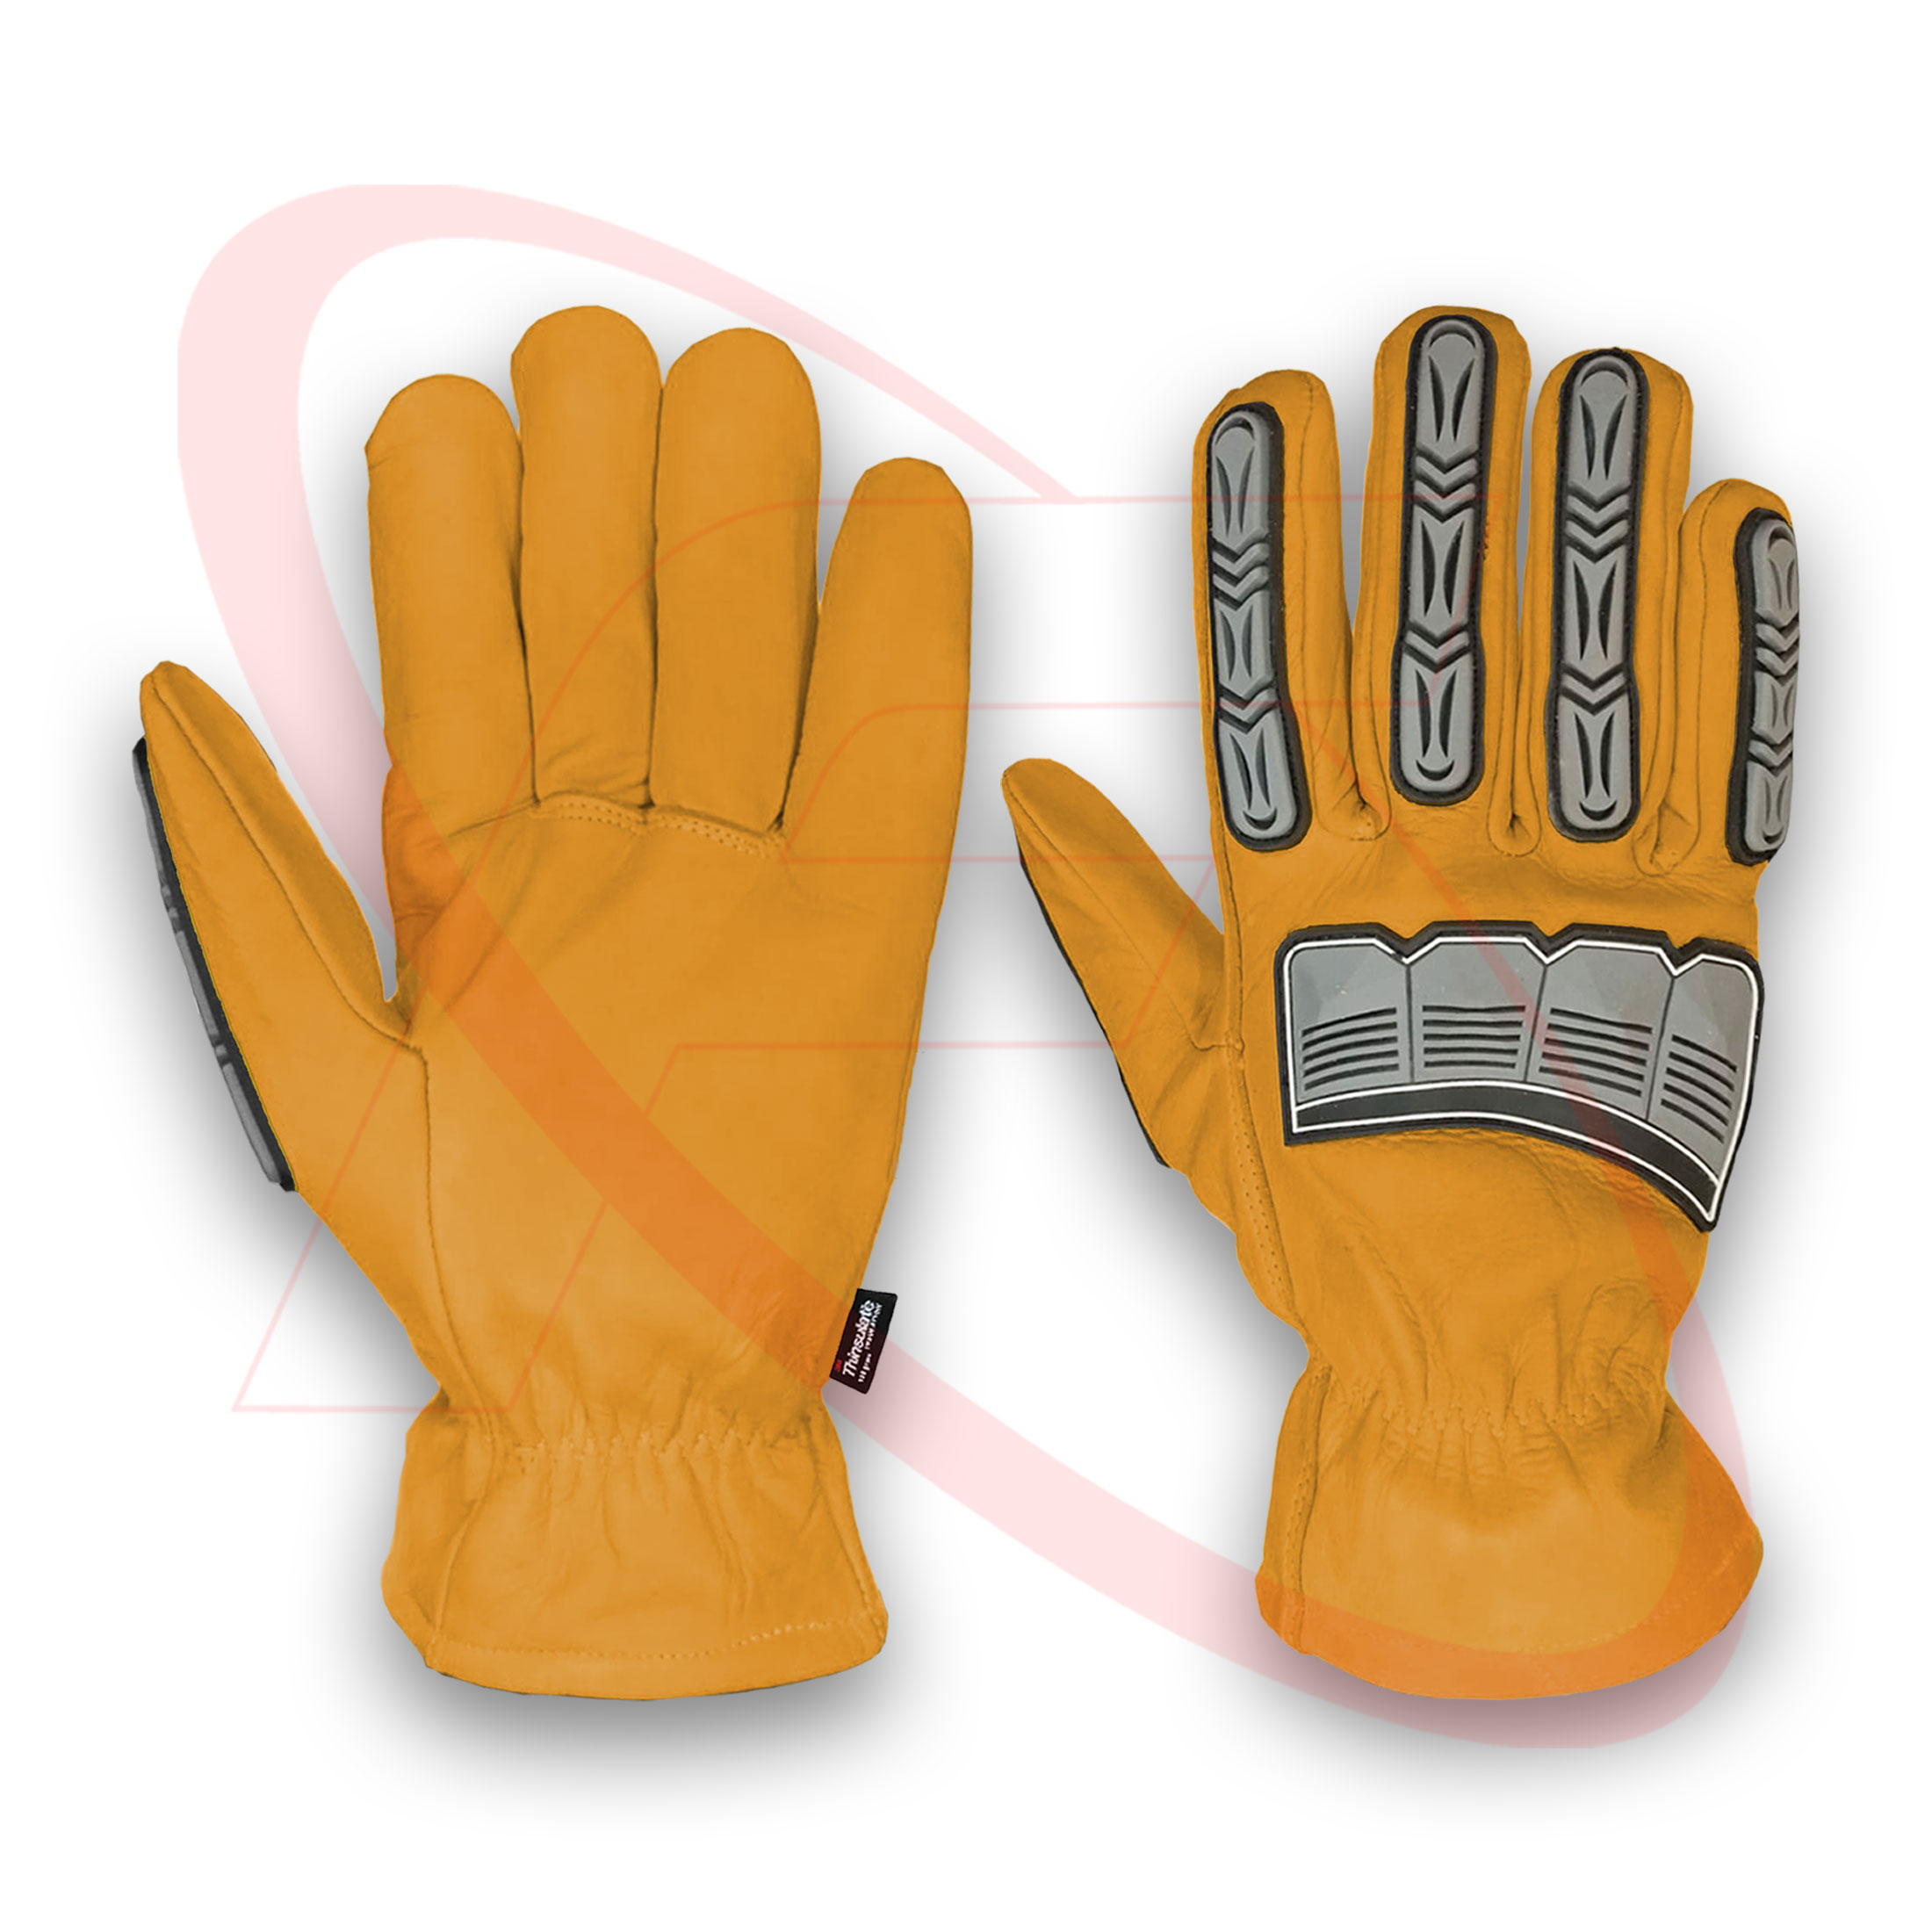 Anti Impact Gloves in Cowhide Leather Safety Work Leather Gloves Wholesale Impact TPR Cut Resistant Winter Driver Gloves